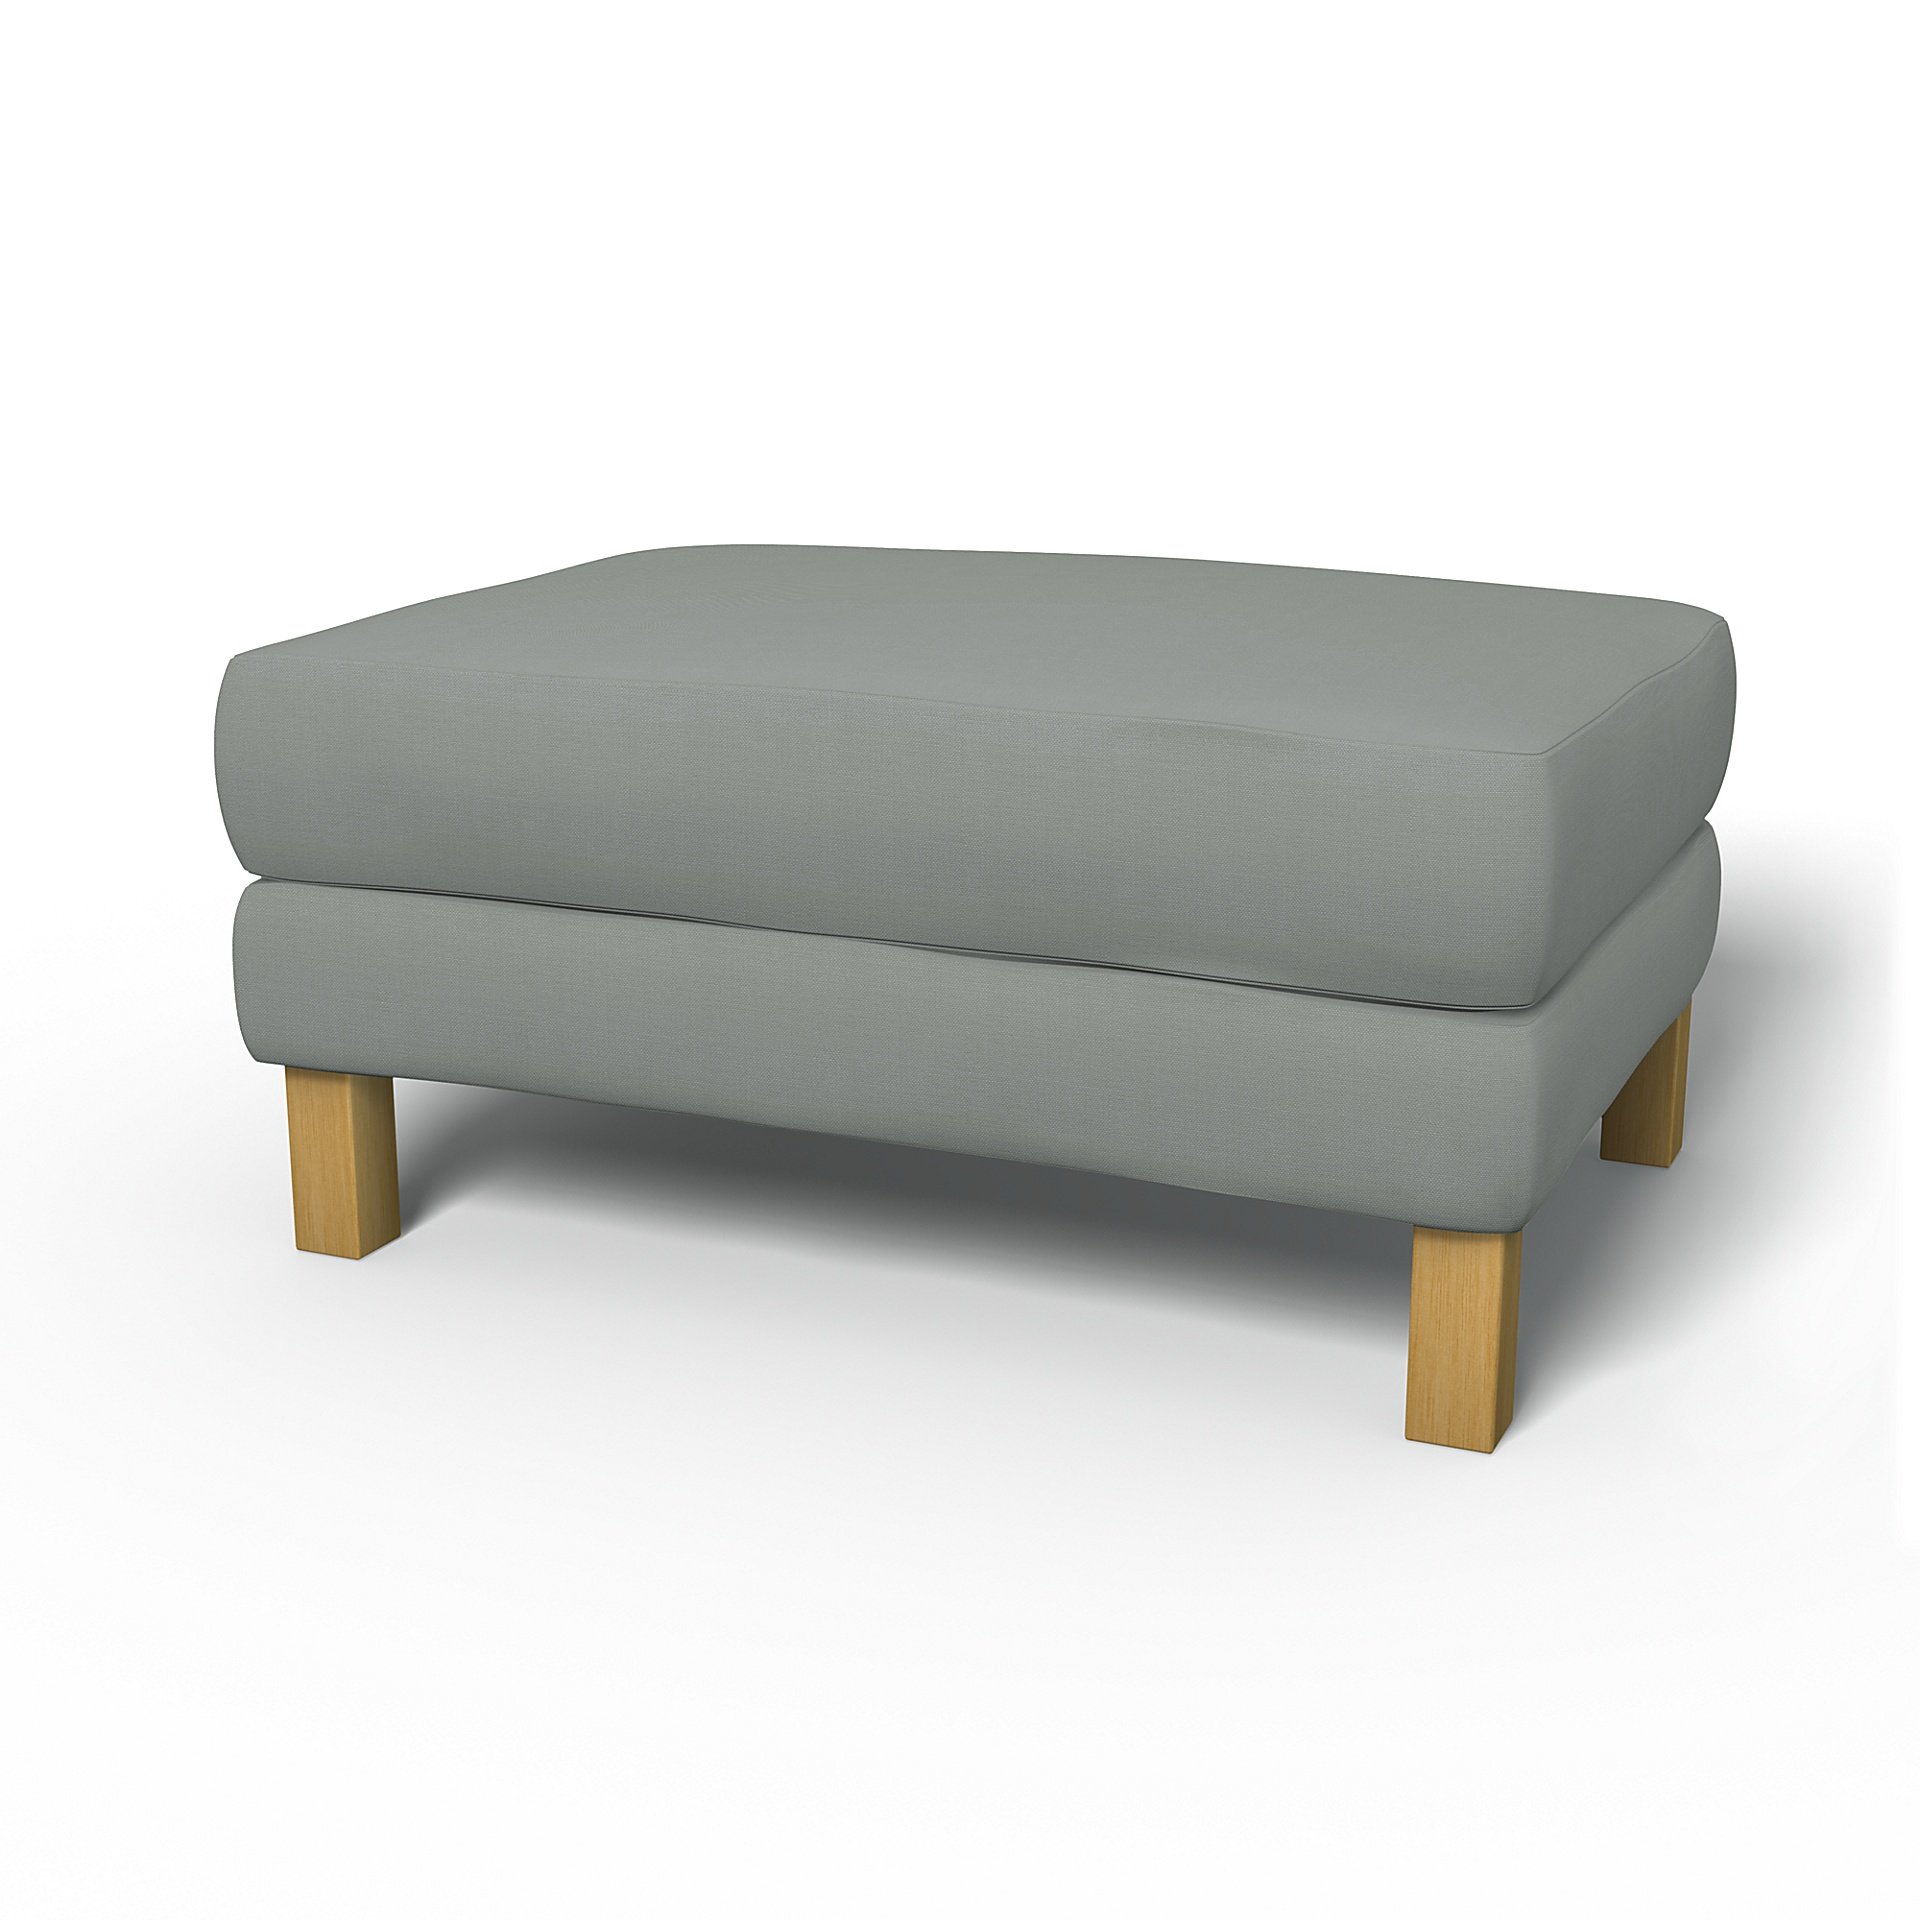 IKEA - Karlstad Footstool Cover, Drizzle, Cotton - Bemz